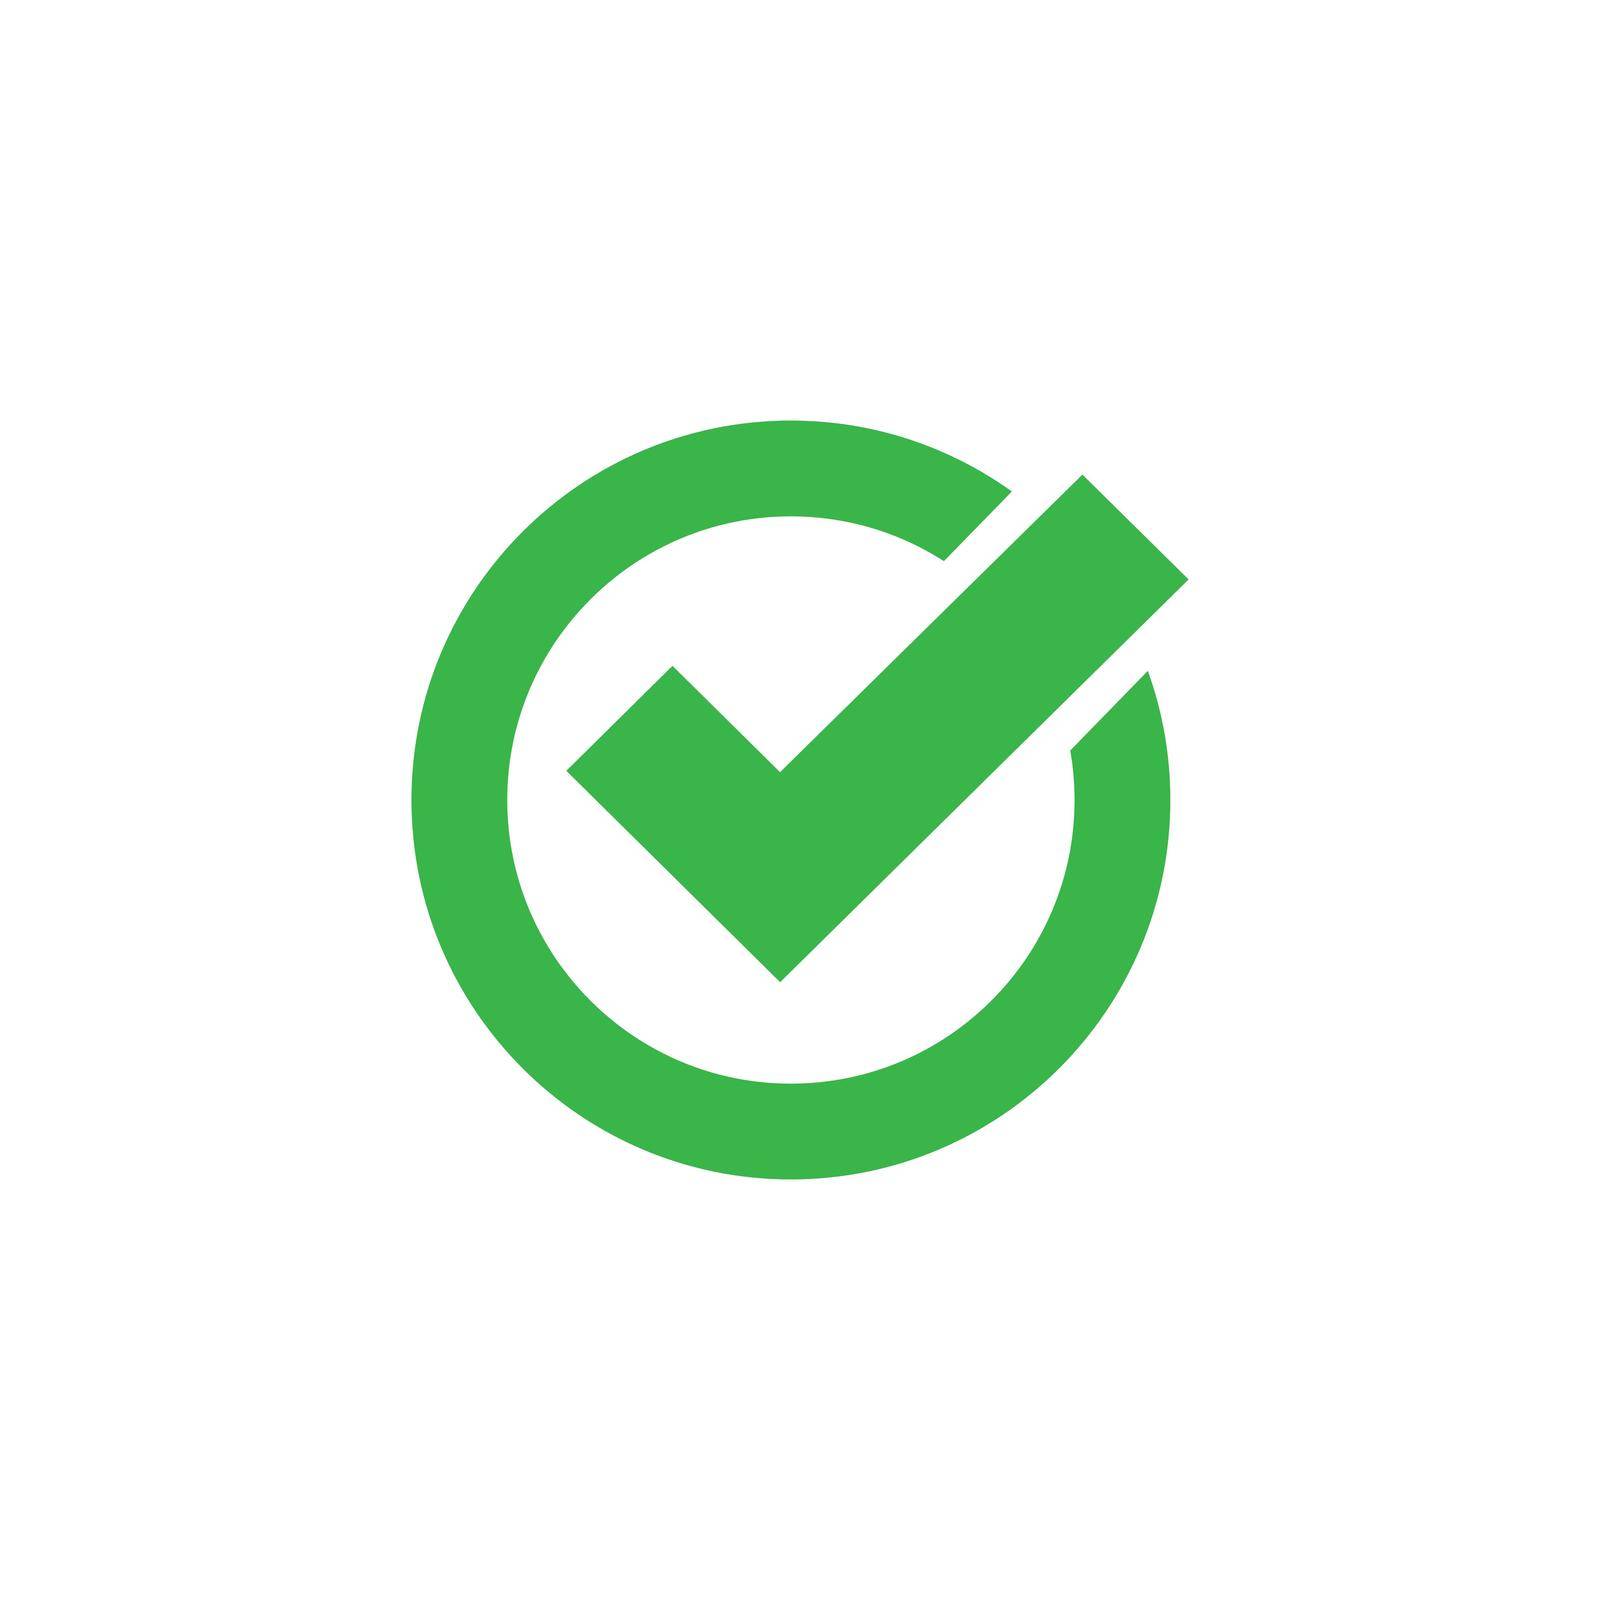 Checkmark icon green in flat. Vector EPS 10